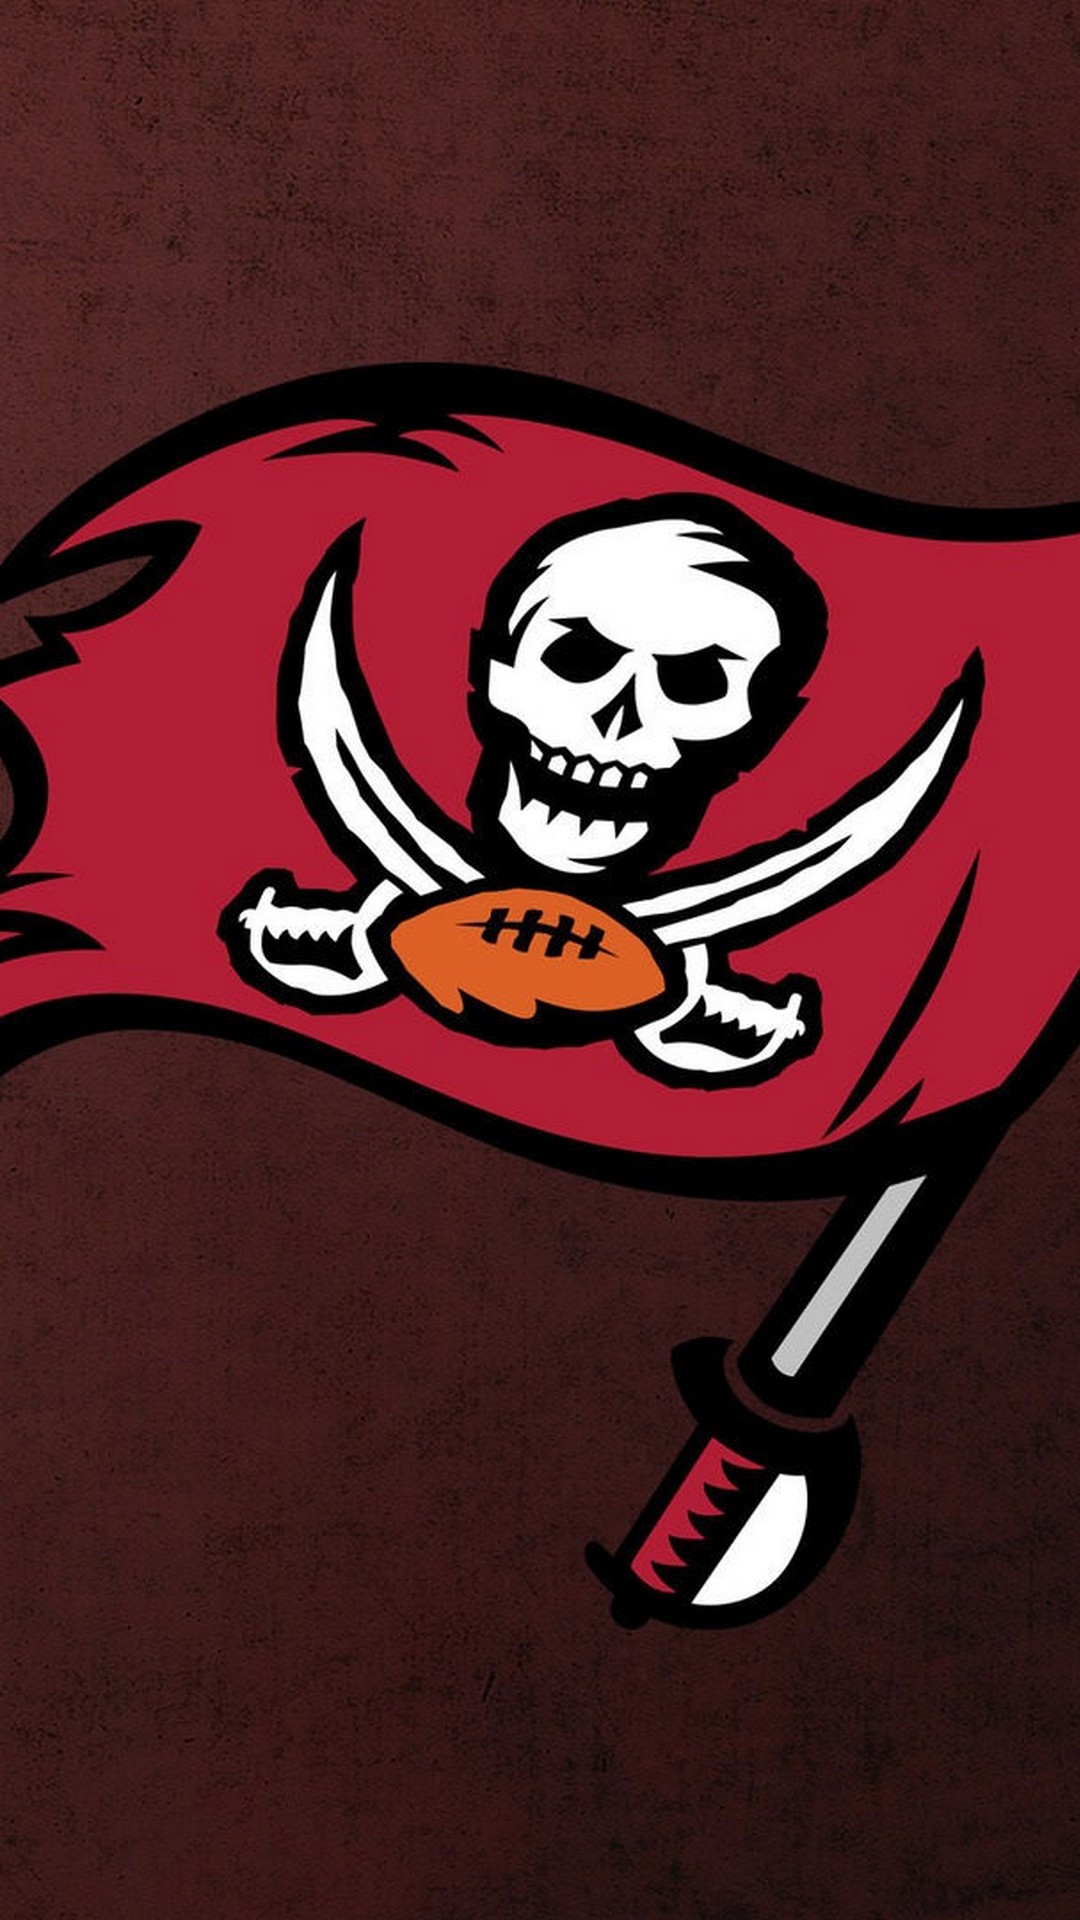 Tampa Bay Buccaneers Logo iPhone Wallpaper Size with high-resolution 1080x1920 pixel. Donwload and set as wallpaper for your iPhone X, iPhone XS home screen backgrounds, XS Max, XR, iPhone8 lock screen wallpaper, iPhone 7, 6, SE and other mobile devices